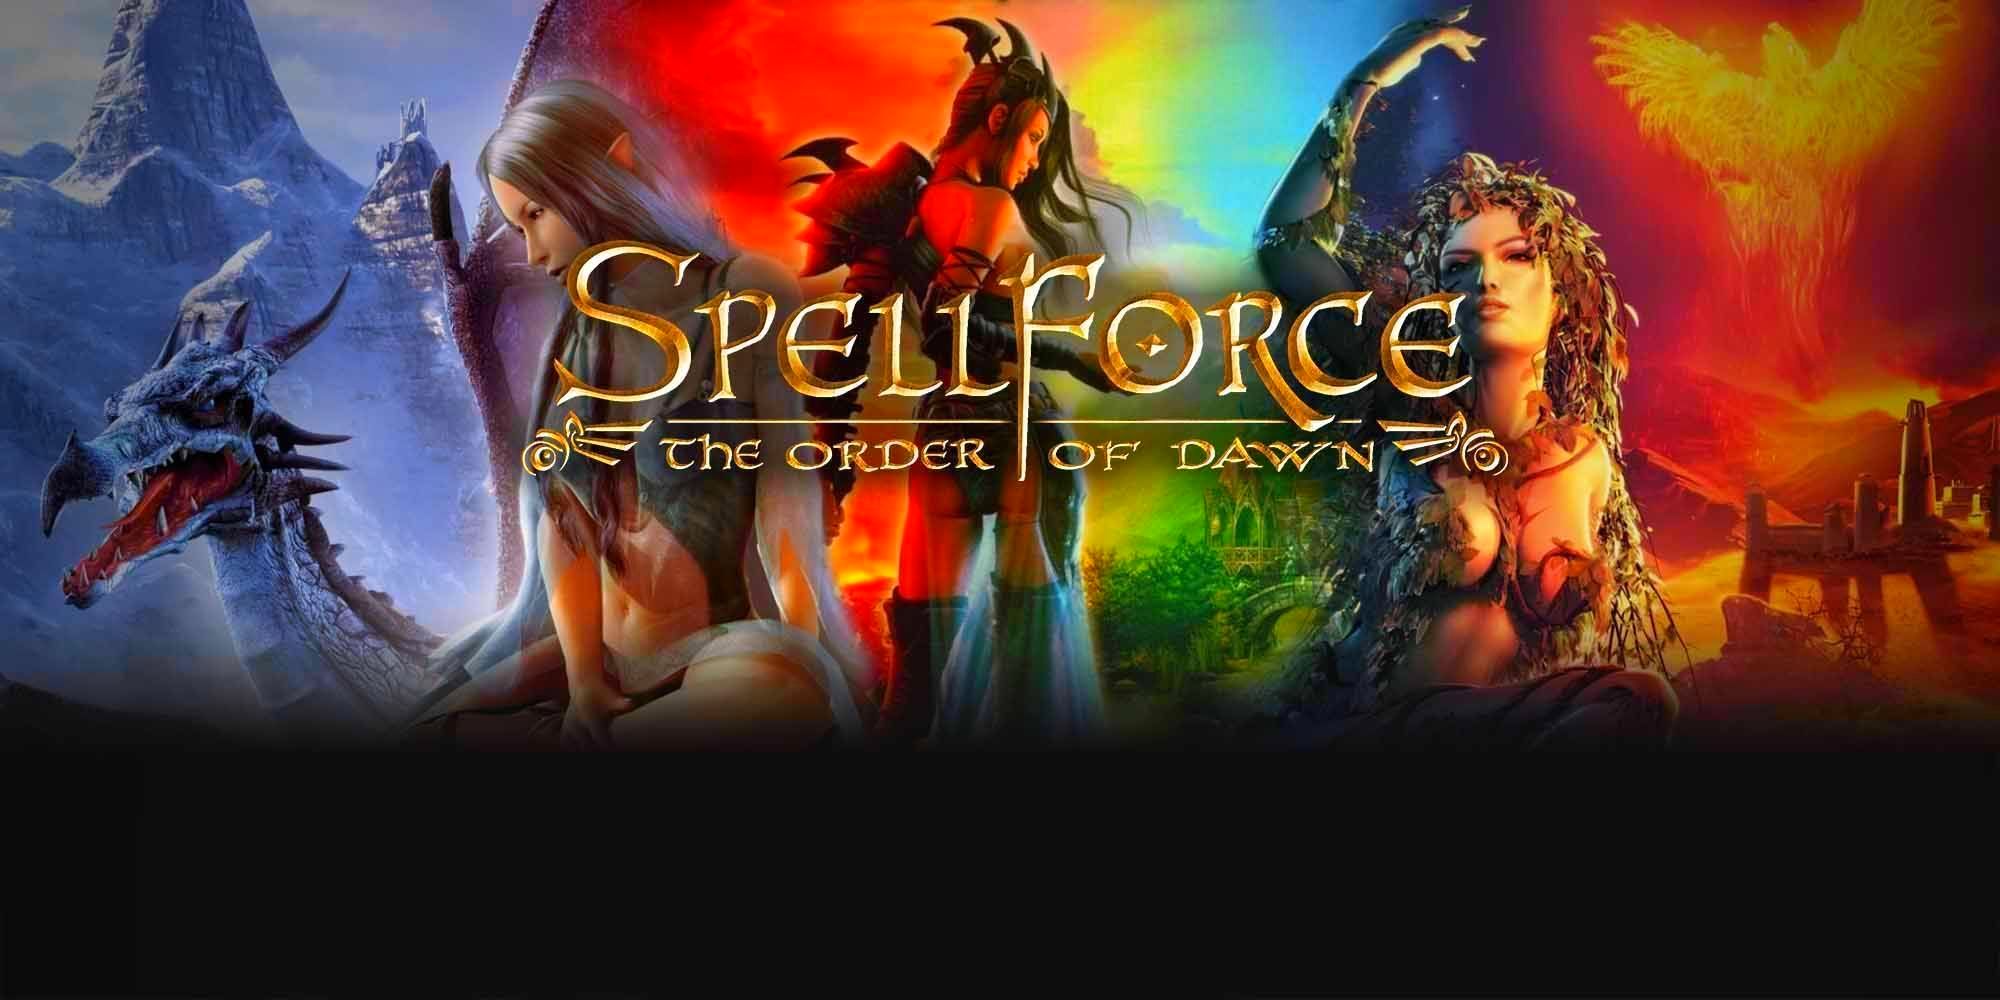 Spellforce 2 editor save game